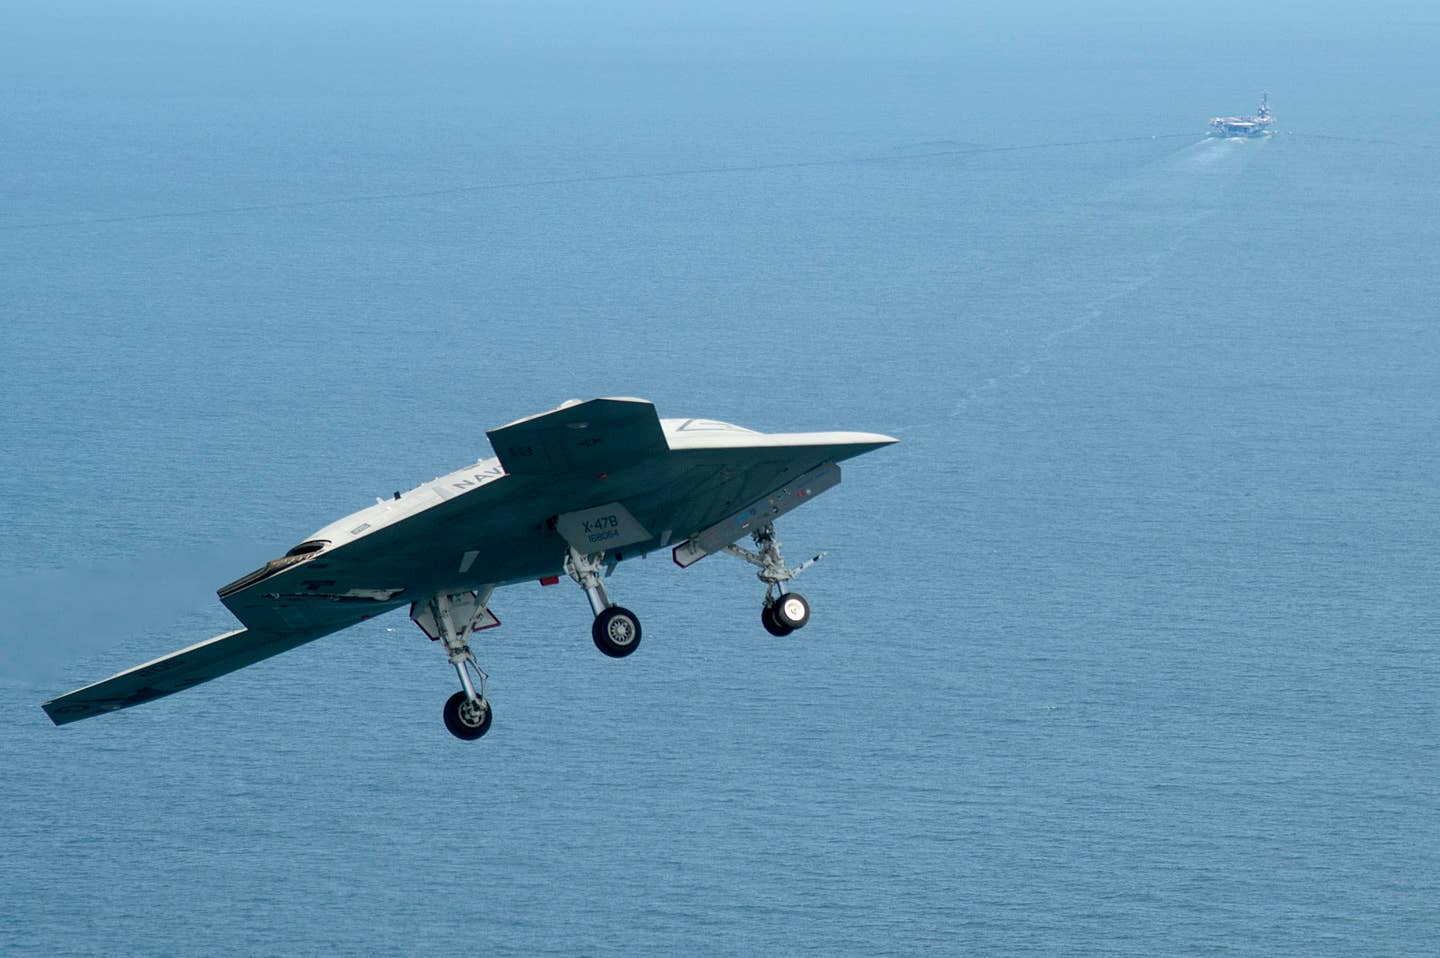 An X-47B Unmanned Combat Air System demonstrator about to enter the groove during an approach to the aircraft carrier USS <em>George H.W. Bush </em>(CVN 77). <em>George H.W. Bush</em> was the first aircraft carrier to successfully catapult launch an unmanned aircraft from its flight deck. <em>USN photo by Erik Hildebrandt</em>